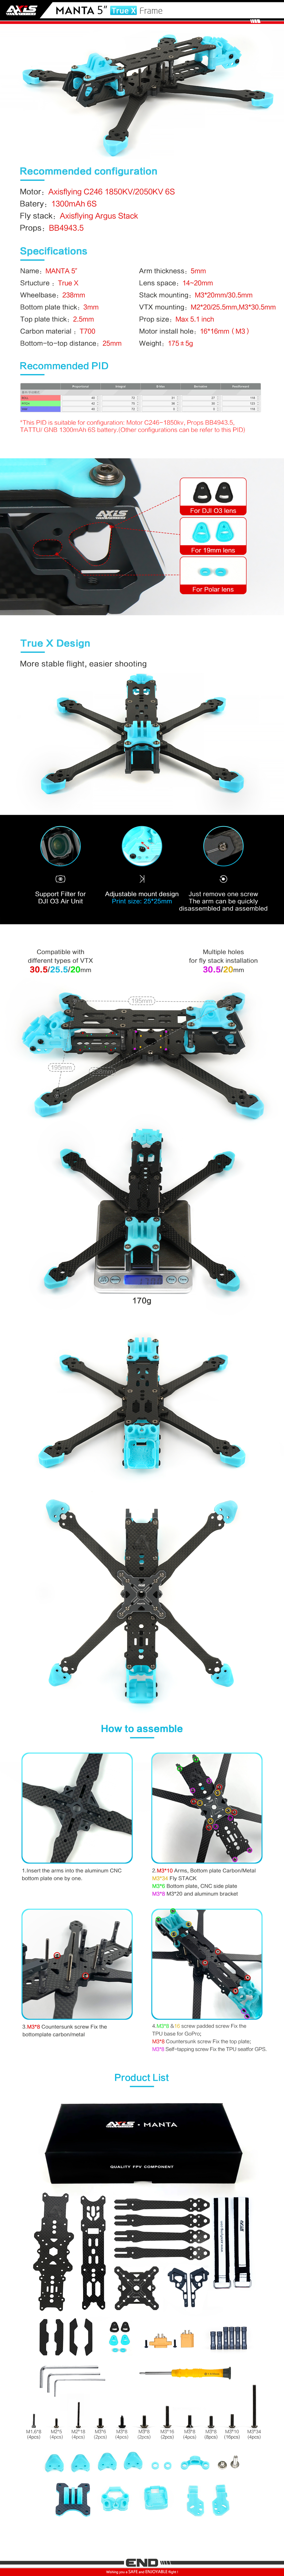 Axisflying MANTA5" / 5inch fpv freestyle Ture X frame kit  MANTA 5" frame kit cinematic drone,cinewhoop drone,longrange drone,freestyle drone,fpv drone,fpv quads,5inch freestyle drone,6inch freestyle drone,7inch longrange drone,5inch quads,6inch quads,7inch LR quads,7" fpv drone,7" fpv quads,7" longrange quads,6" cinematic quads,6" freestyle quads,6" longrange quads